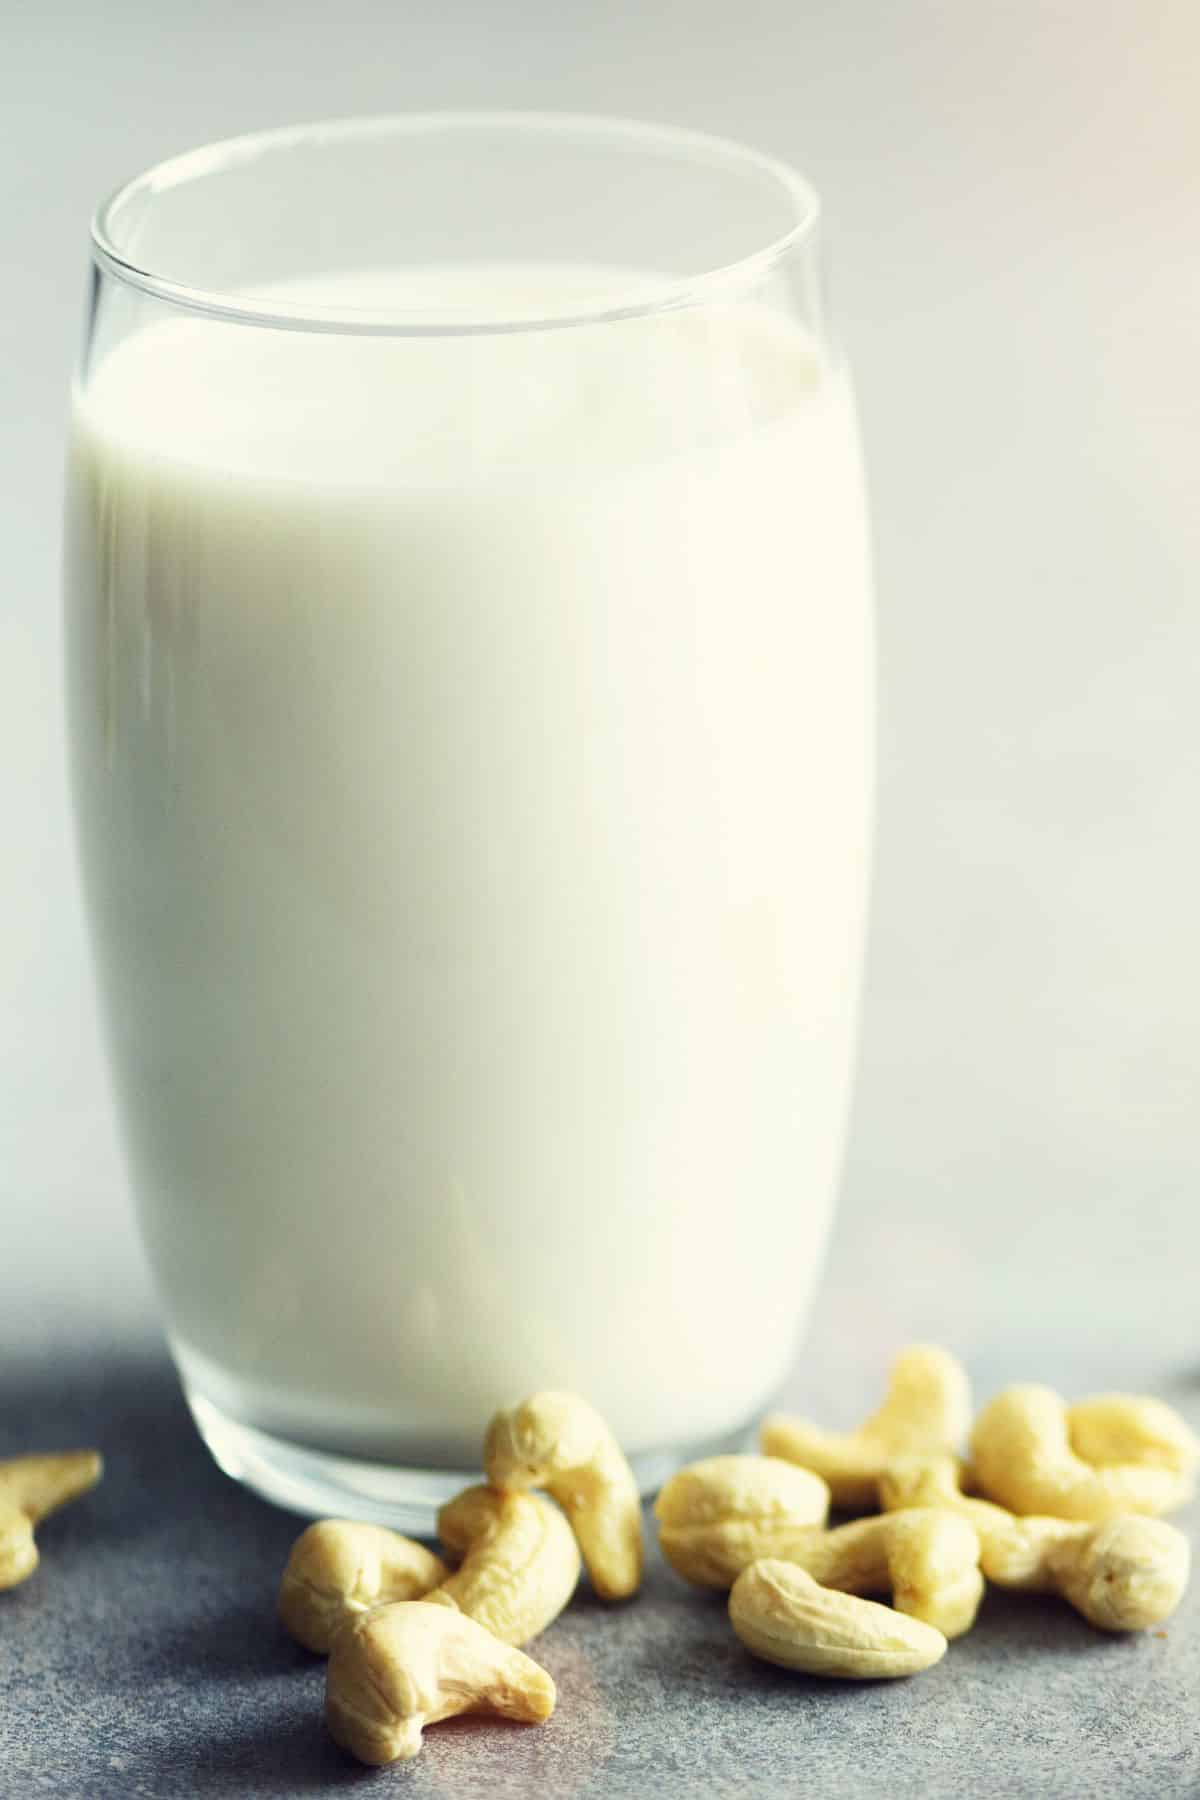 Glass of cashew milk with cashews on white table.